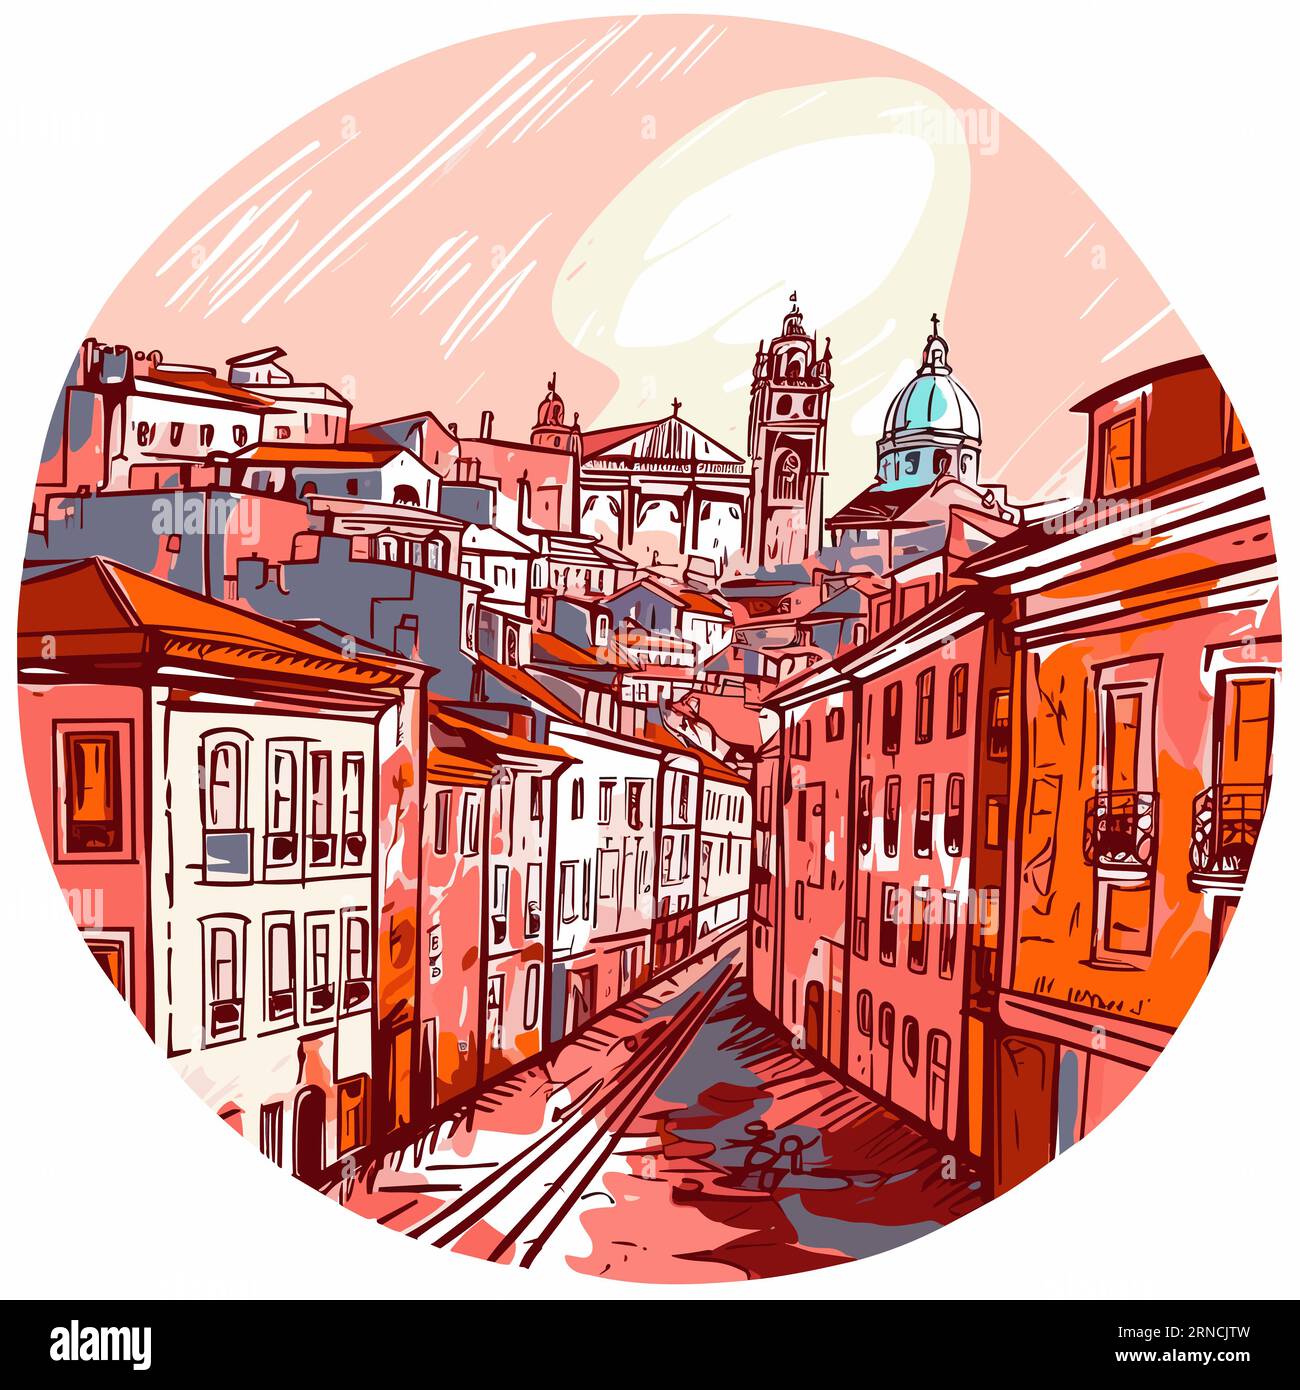 Street Sketch Of Old Building In Lisbon, In The Style Of Light Red And Amber, Psychedelic Illustration, Rounded Shapes, Terraced Cityscapes Stock Vector